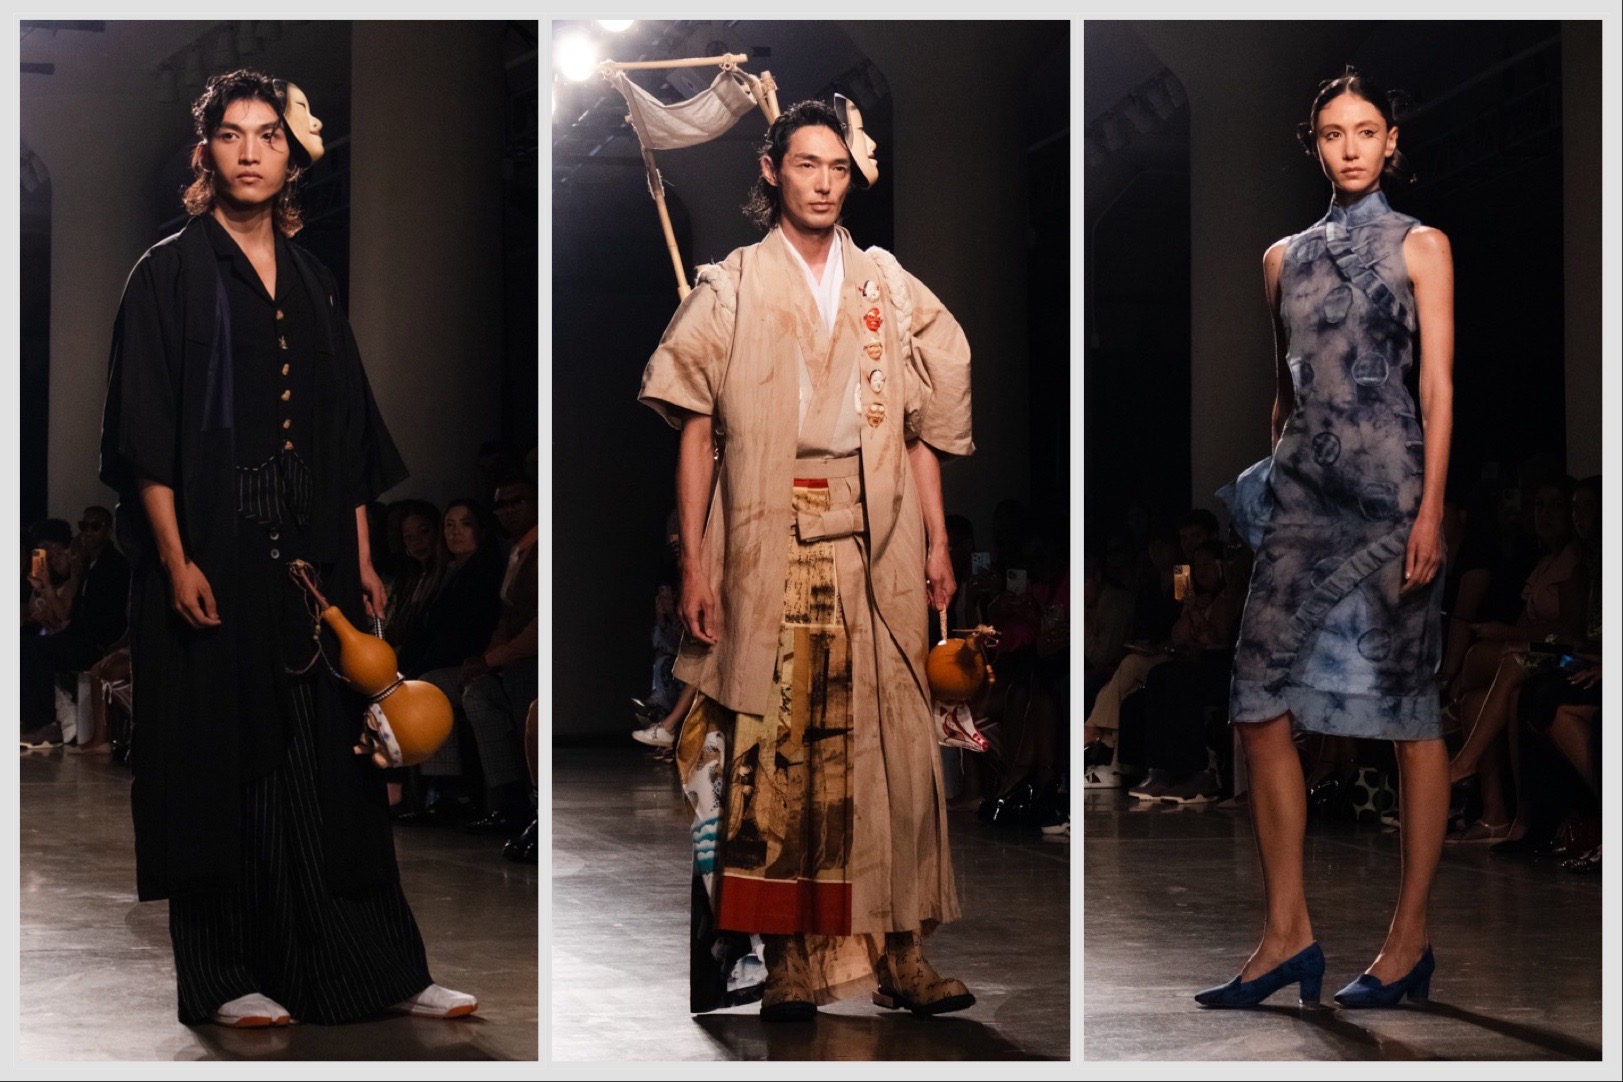 A collage of three images from left to right: a model wearing a black kimono and a face mask on their head; a model wearing a cream kimono and face mask on their head; a model wearing a blue chiffon dress.